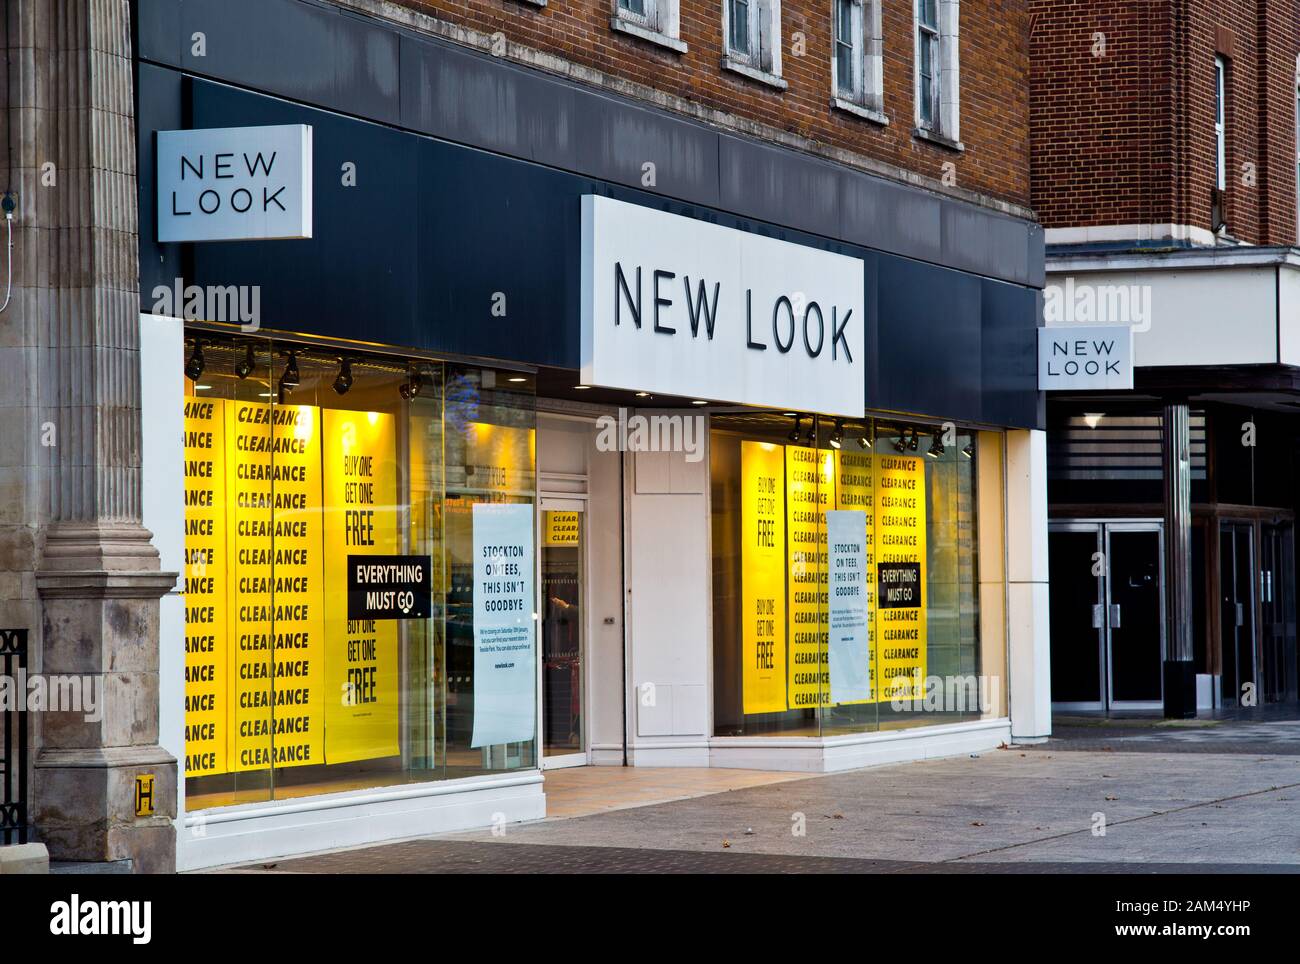 New Look Store Closing Down, High Street, Stockton on Tees, Cleveland, England Stockfoto